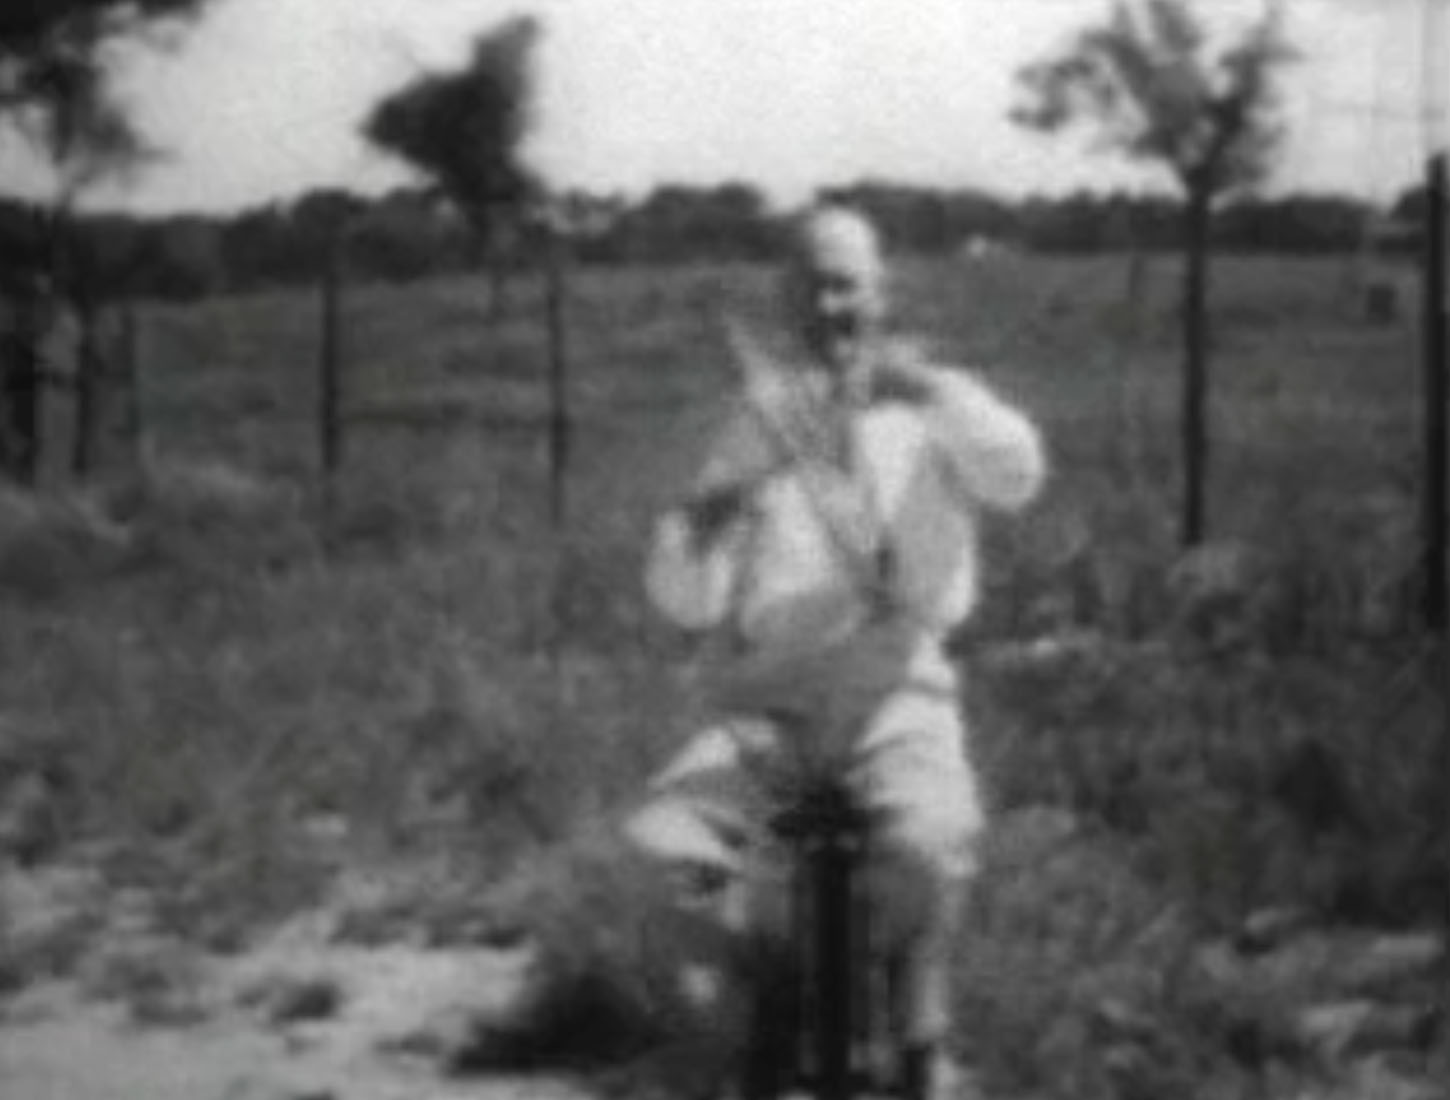 Robert Goddard, smiling as he demonstrates the principle of the gyroscope in order to convince the patent office of the legitimacy of his claims